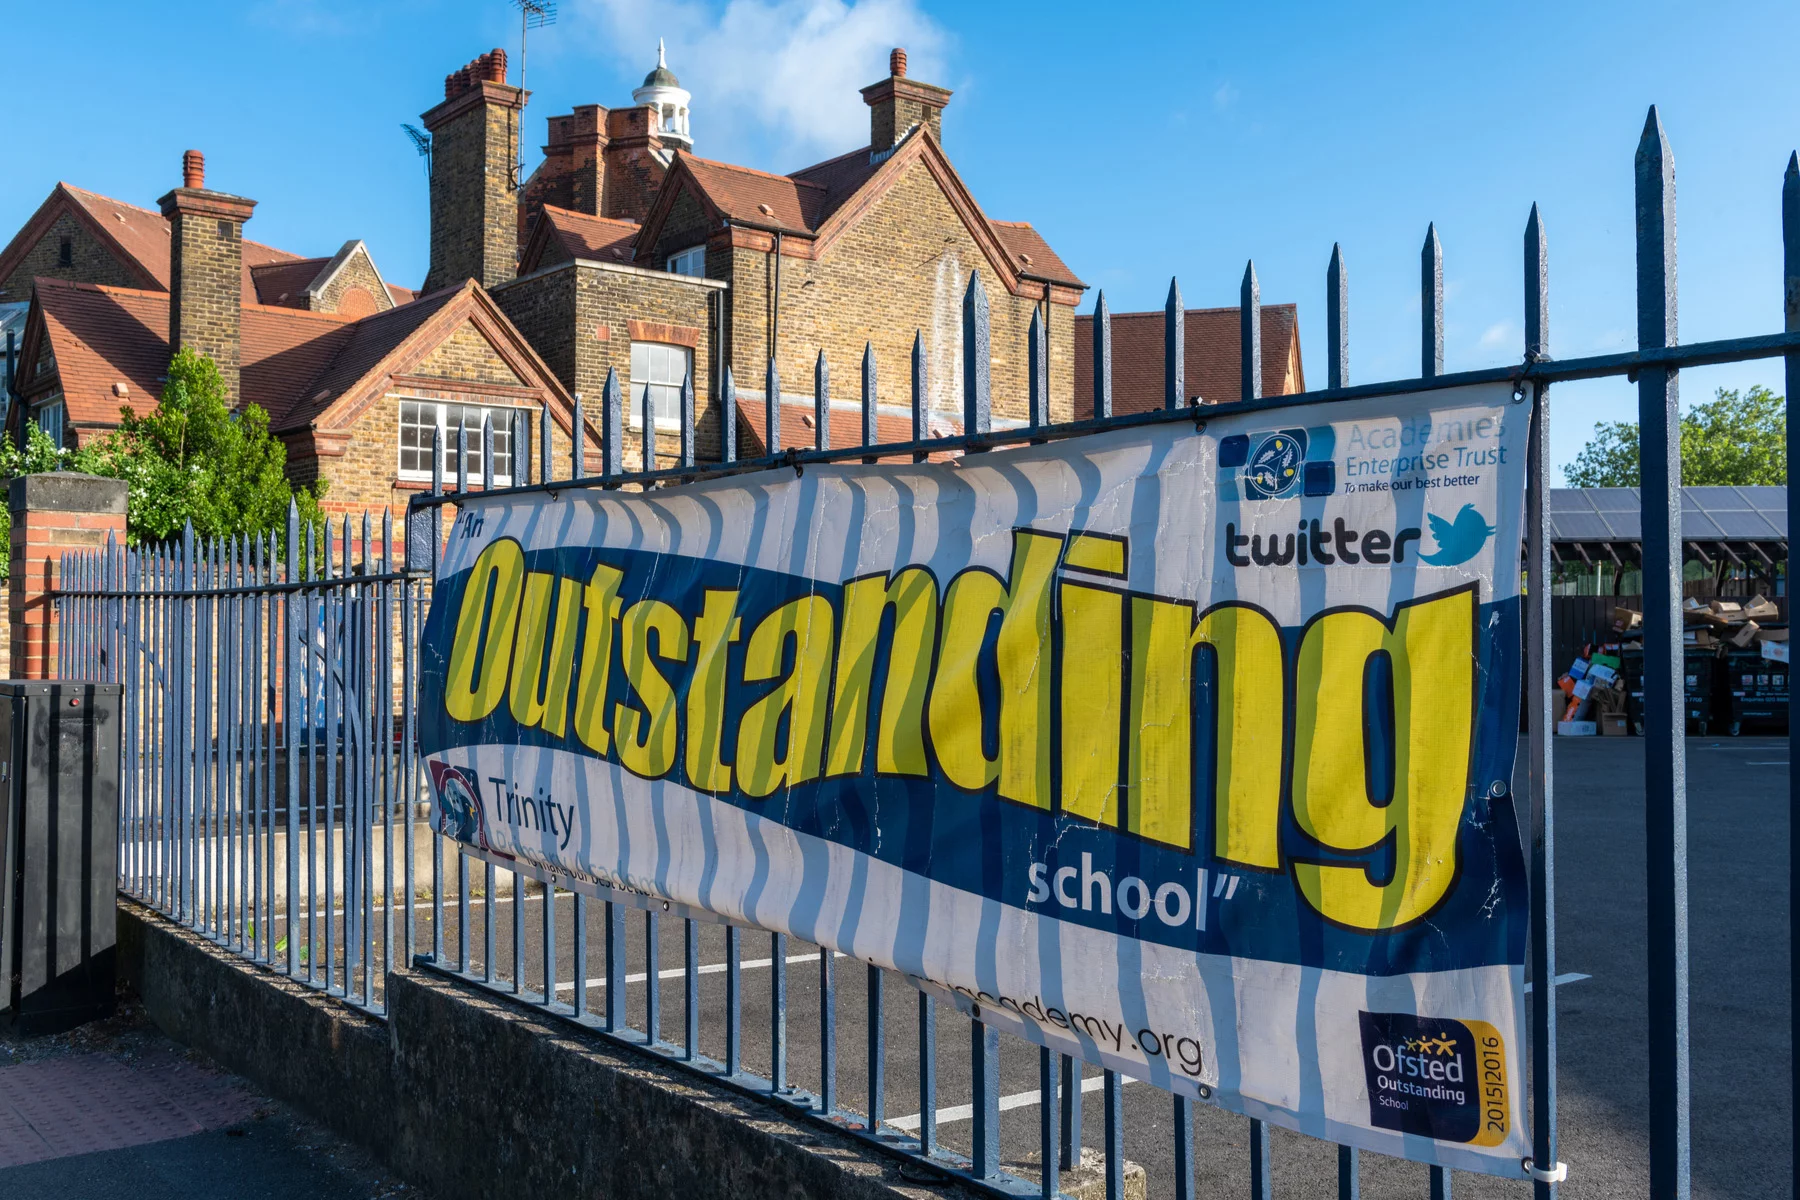 Outstanding Ofsted banner on Trinity Academy school gate to show their quality of education